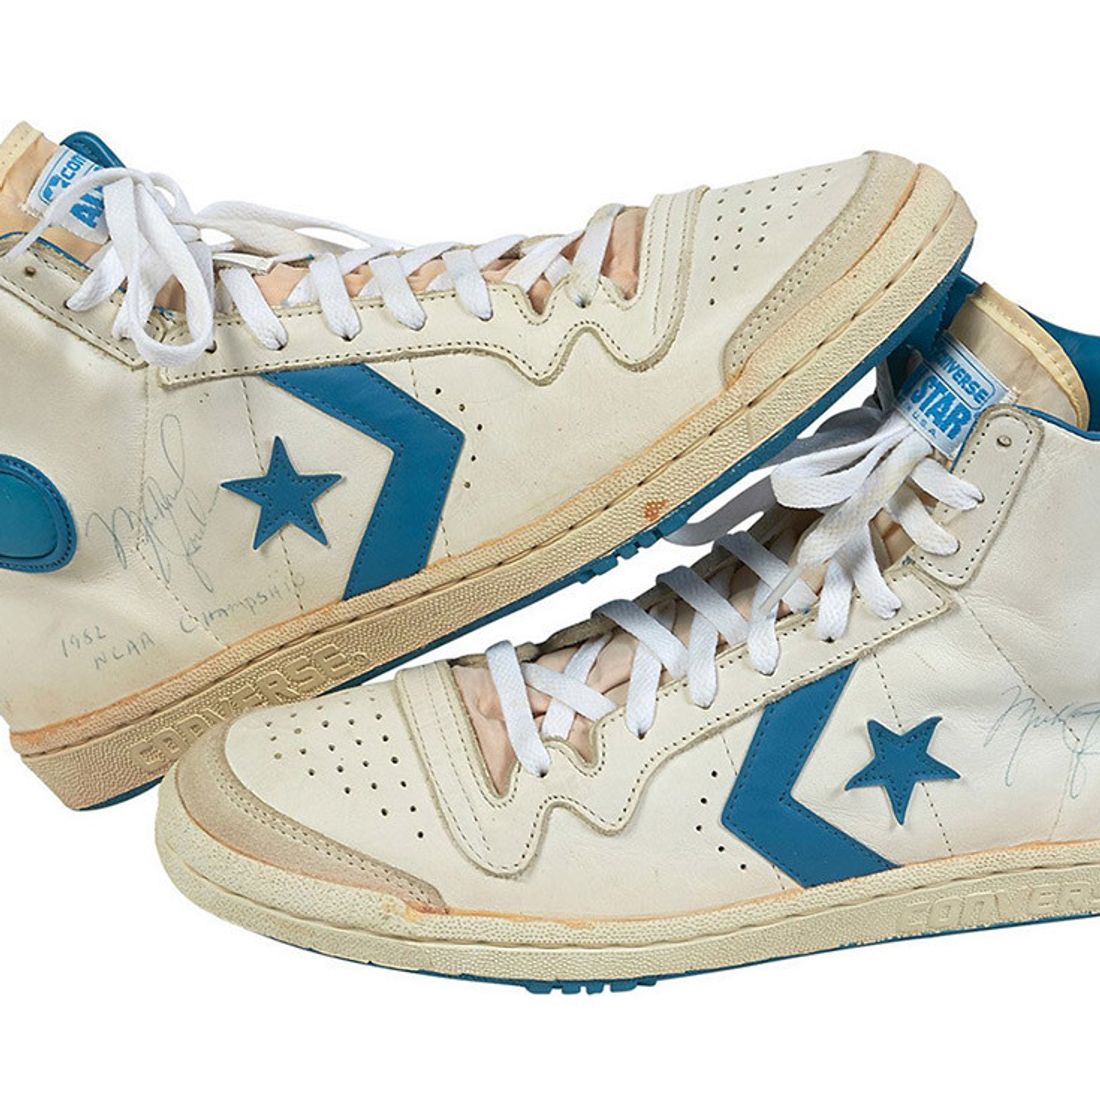 This Converse Pays Homage to Michael Jordan's Early Days